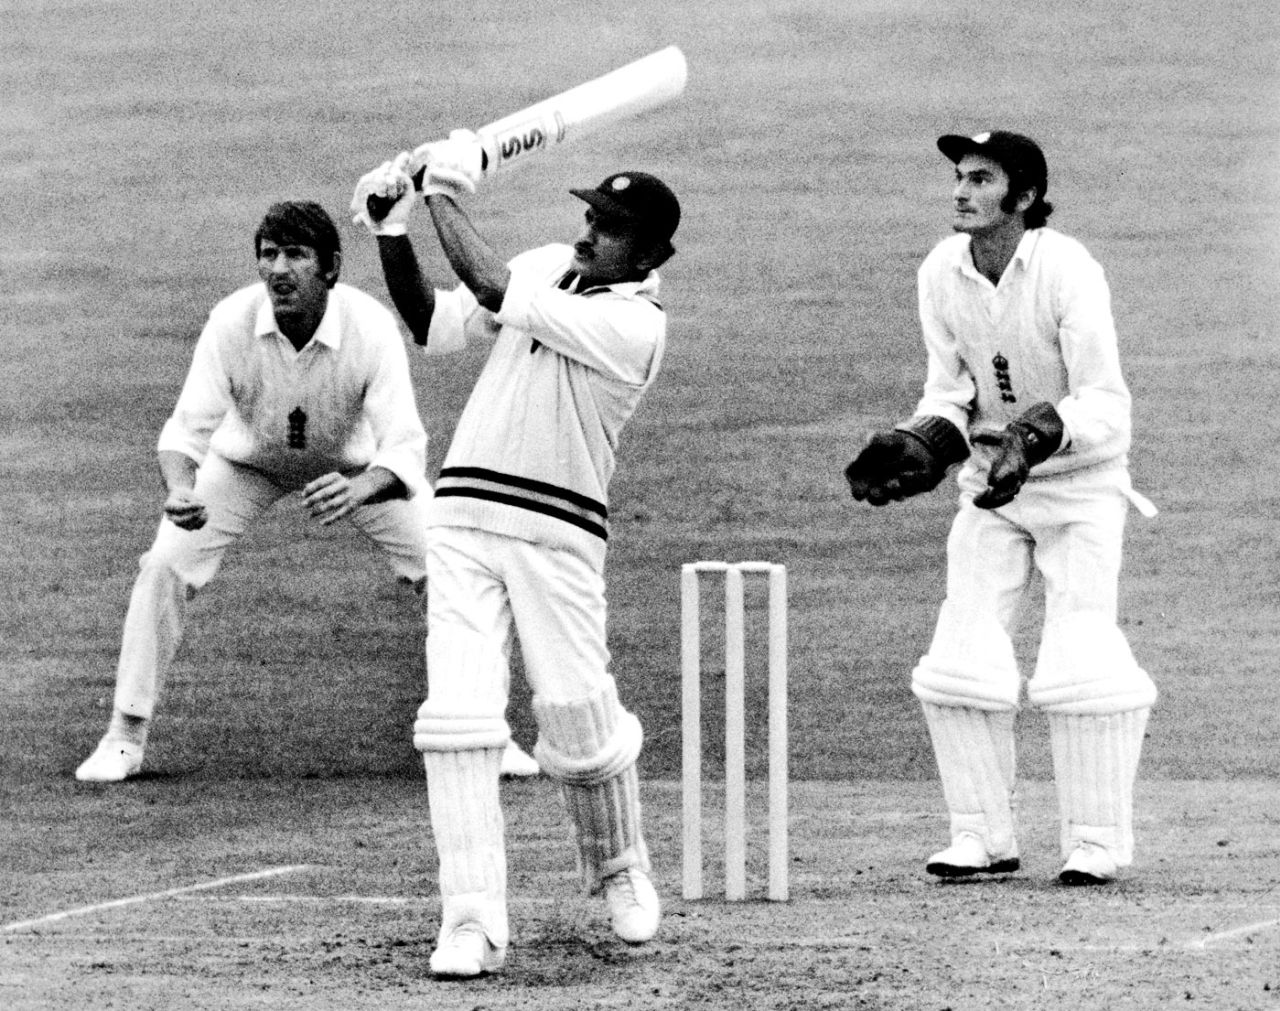 Ajit Wadekar made 48, England v India, 3rd Test, The Oval, 3rd day, August 21, 1971